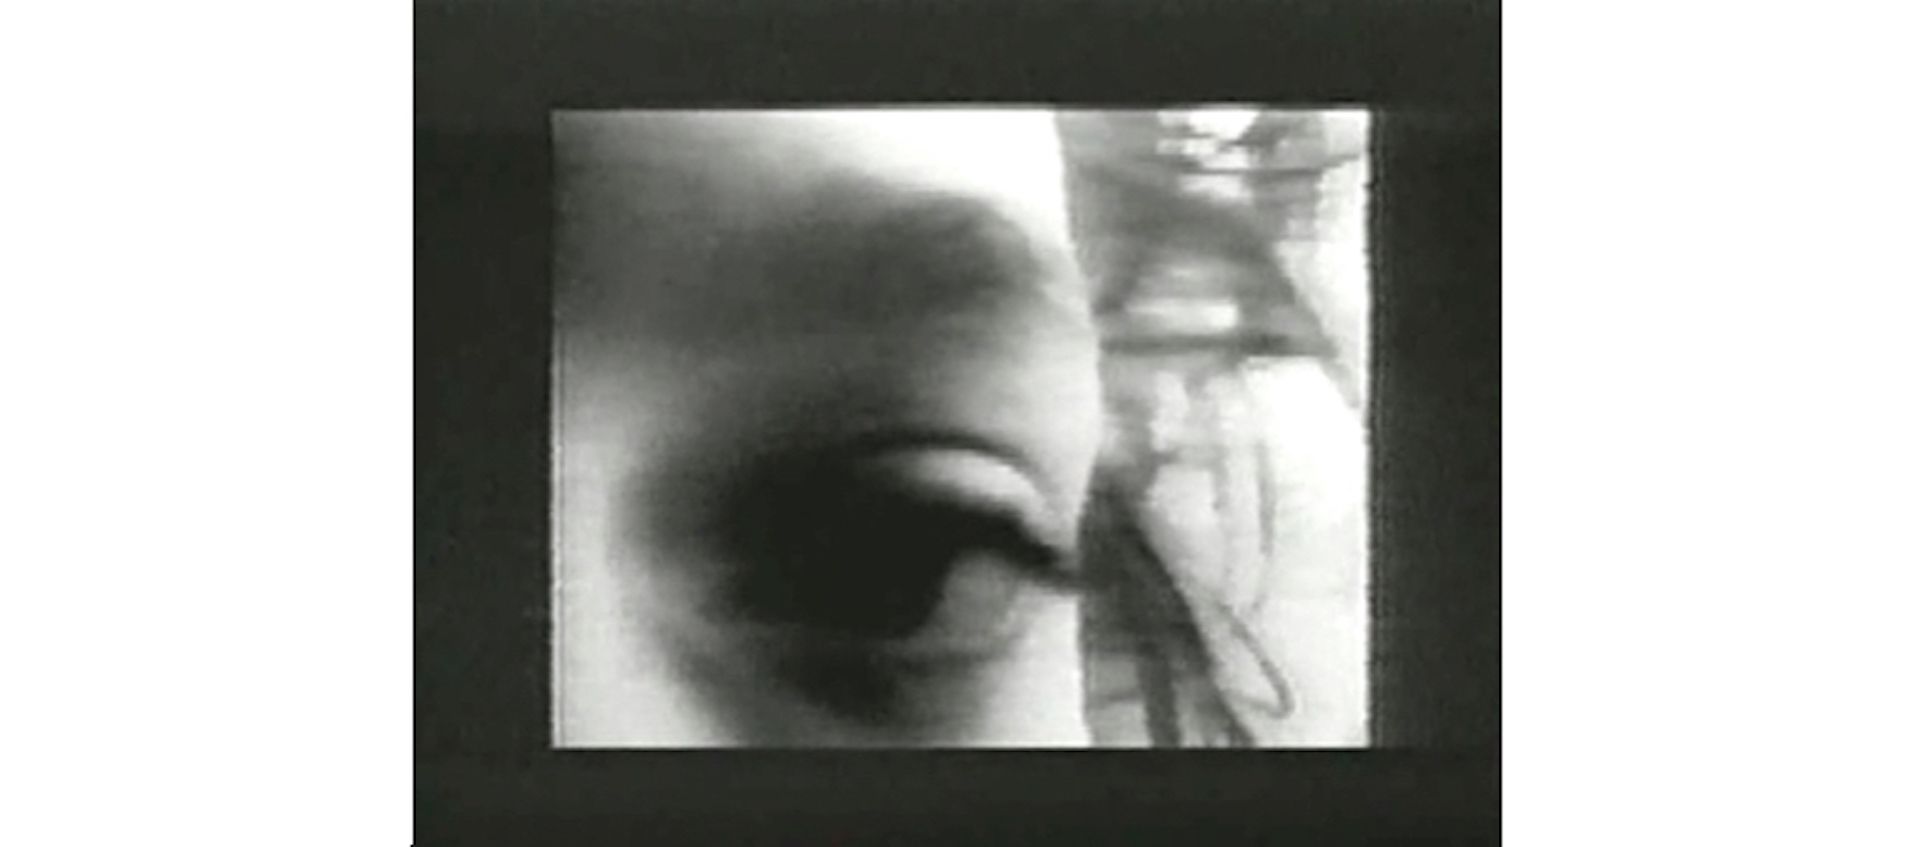 Image of Sadie Benning's eye in closeup in a moment from the artist's 1989 film Living Inside